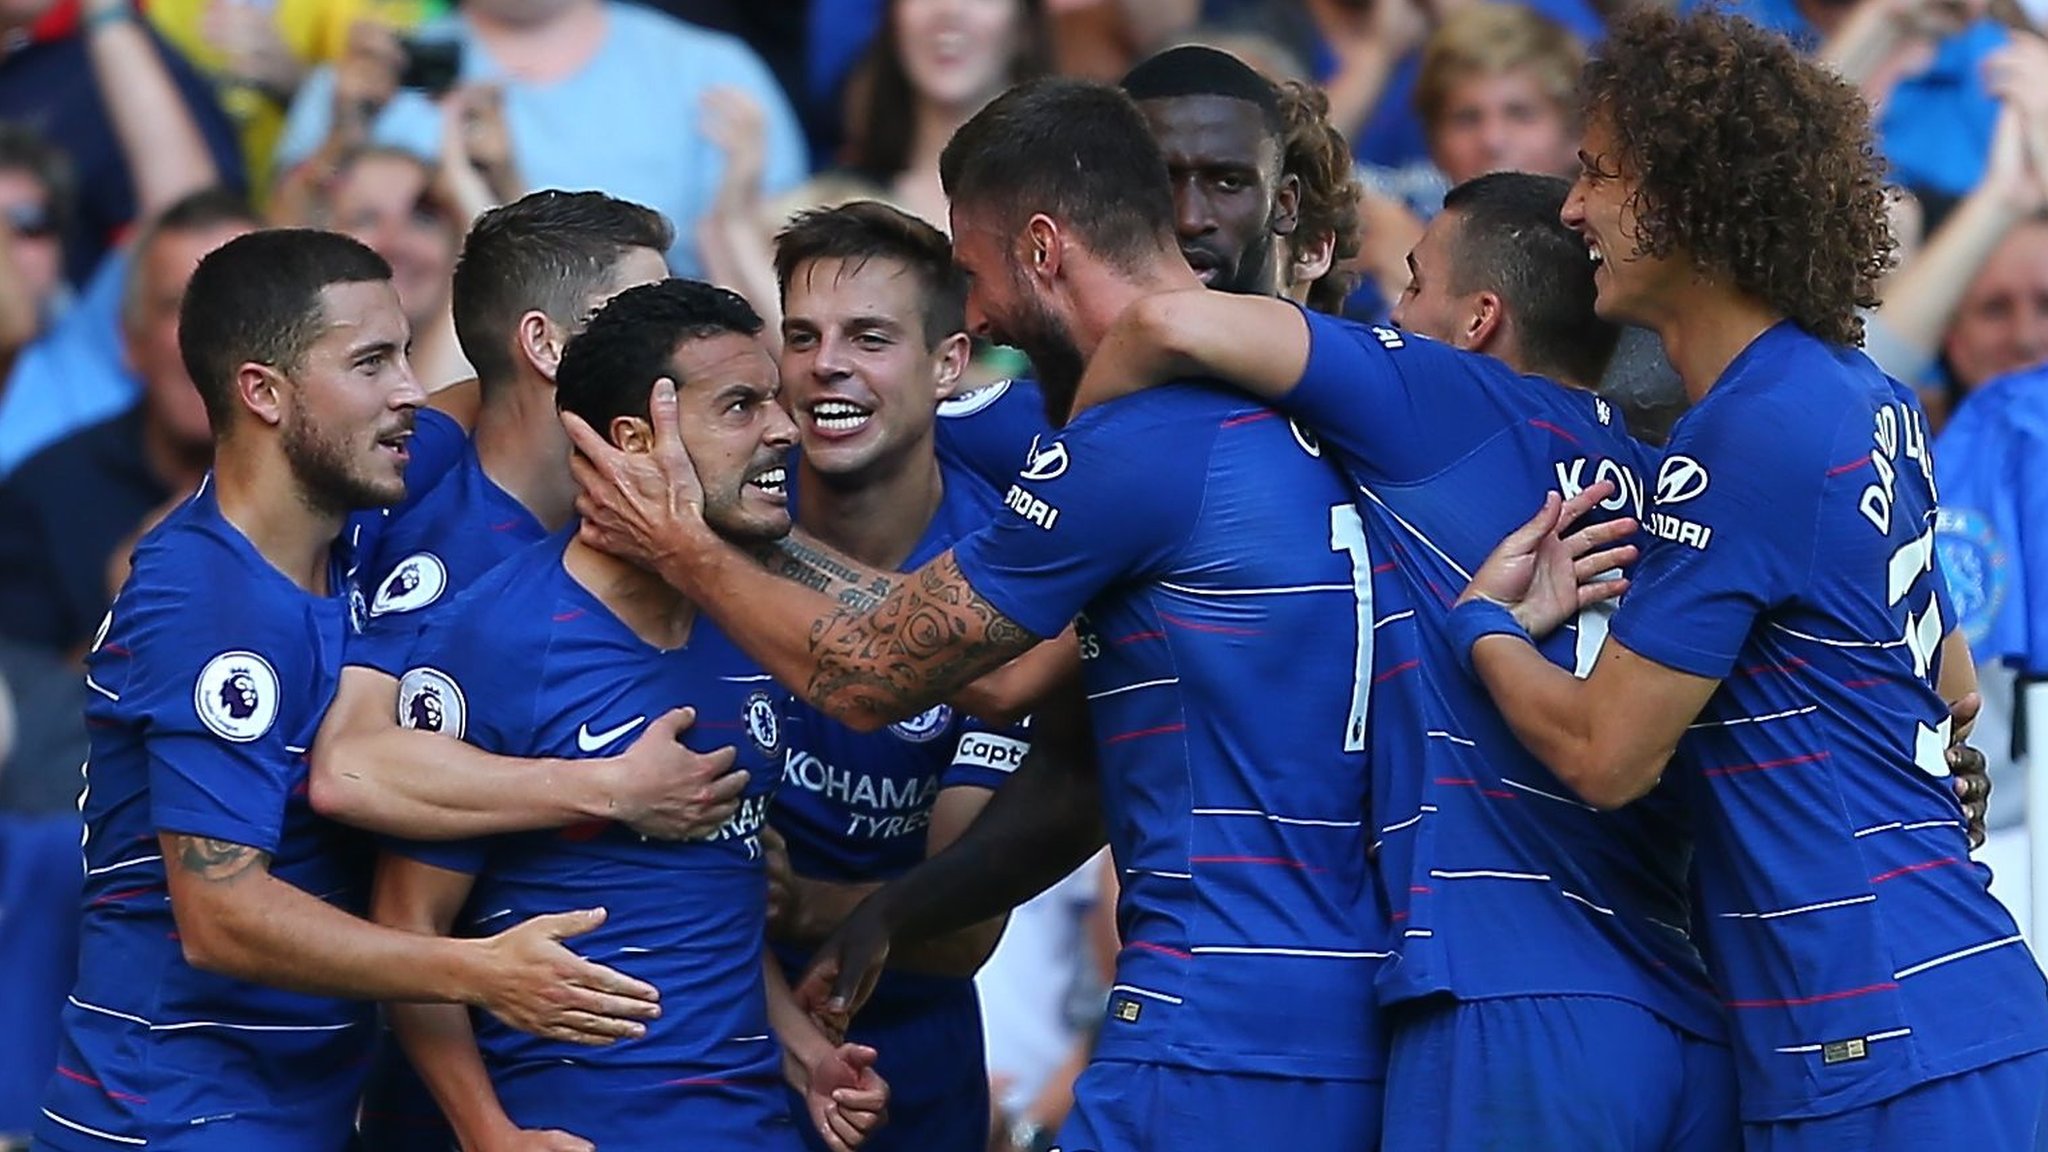 Chelsea keep 100% start with win over Bournemouth